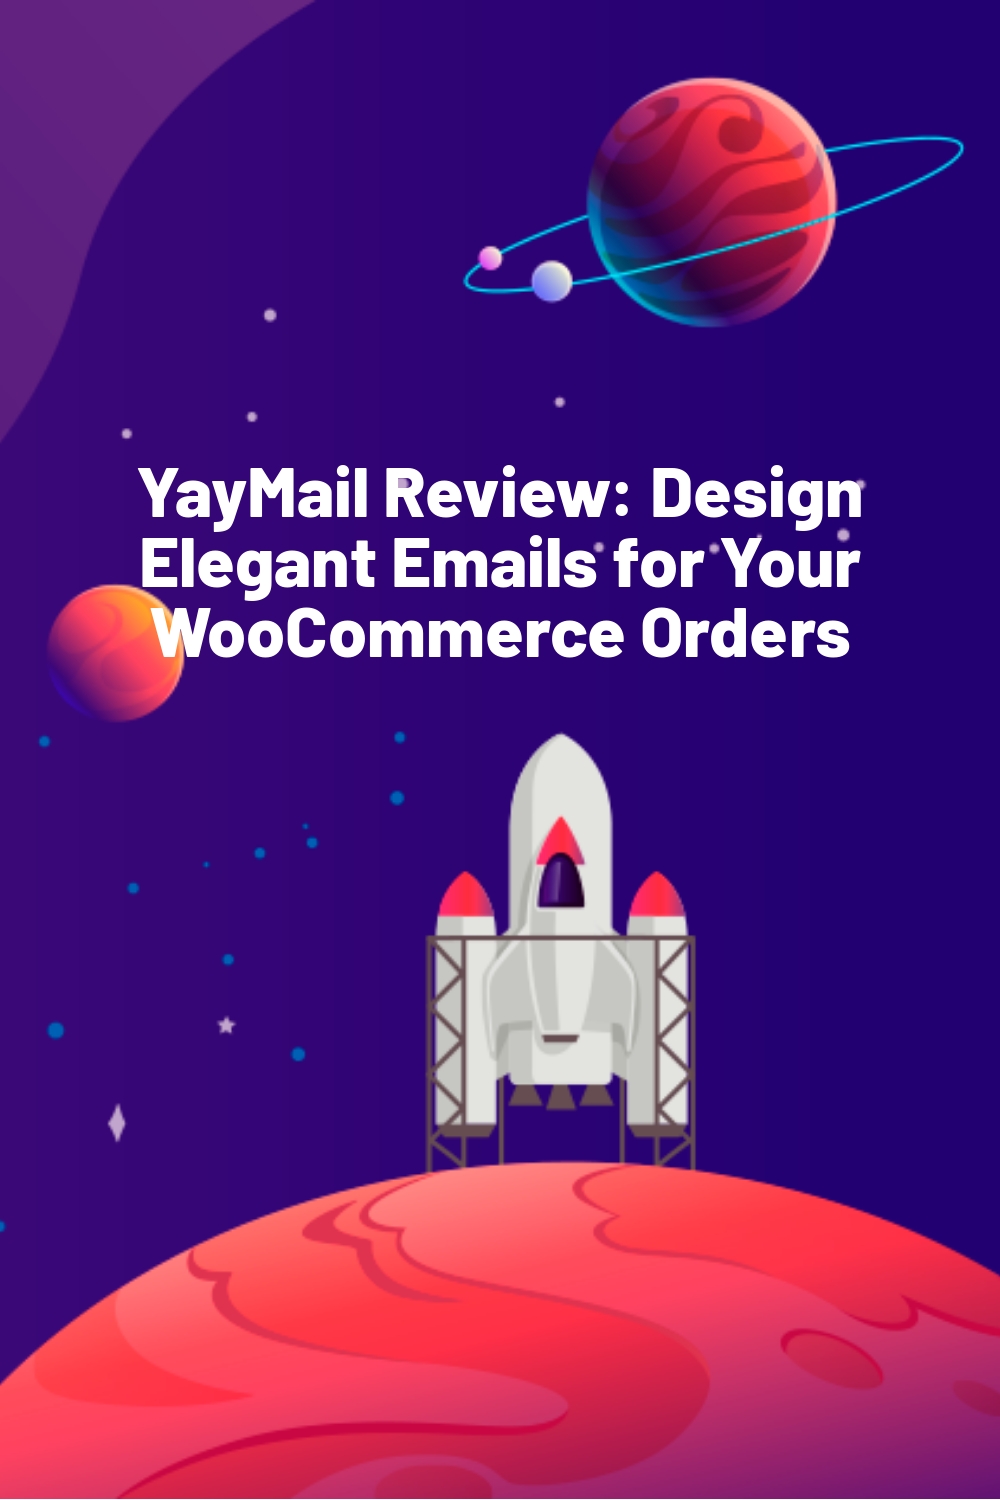 YayMail Review: Design Elegant Emails for Your WooCommerce Orders